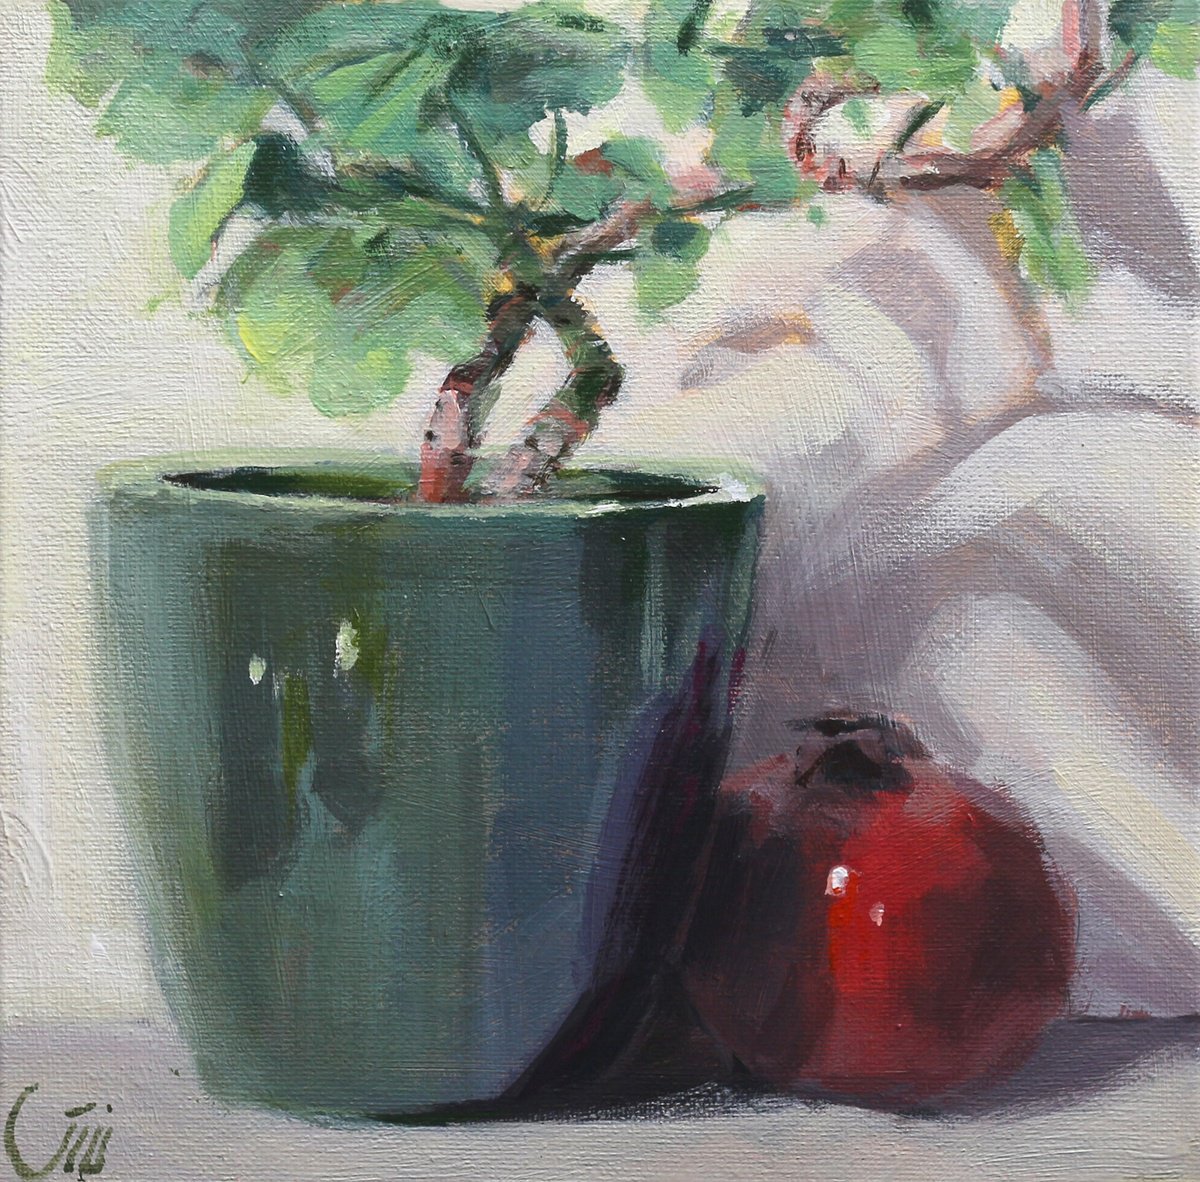 Books and an apple Painting by Natalia Rudko - Jose Art Gallery